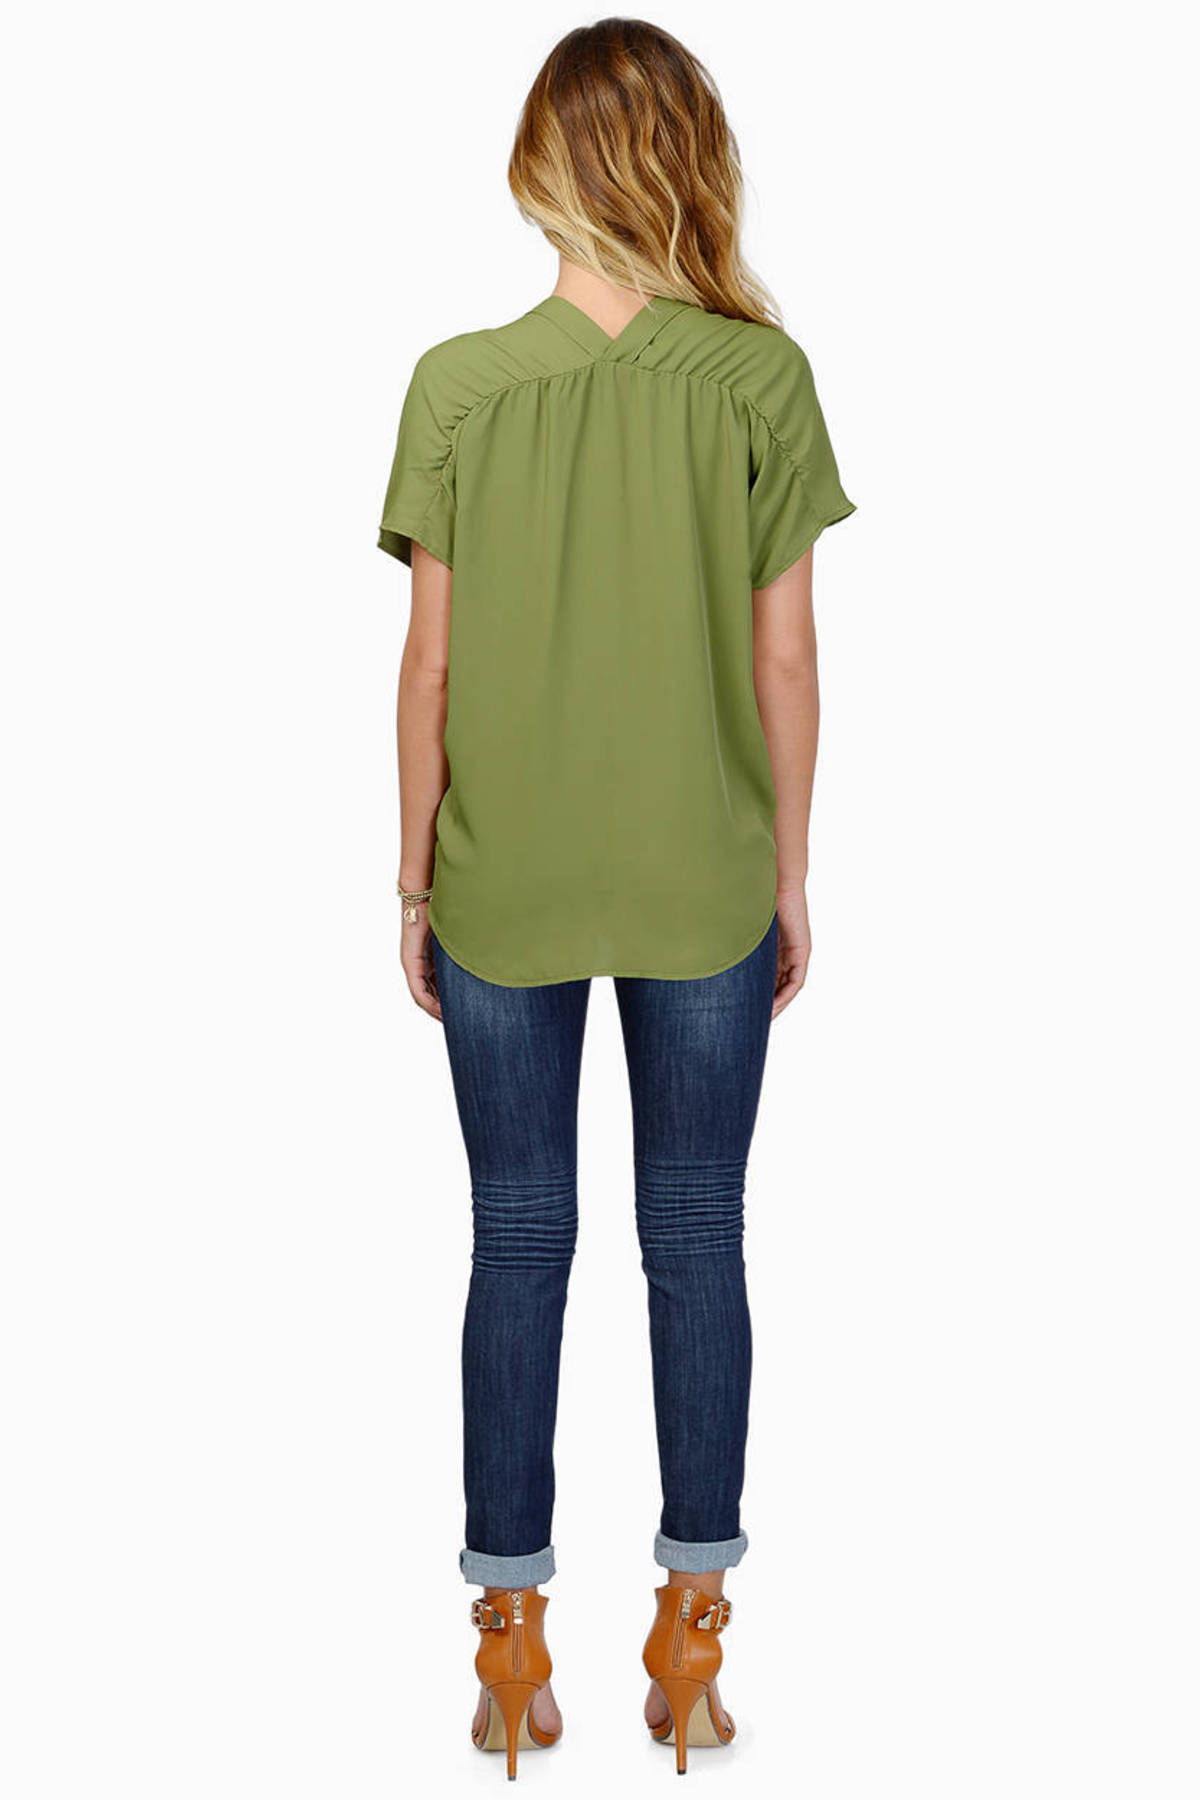 Olive Blouse - green Blouse - Short Sleeve Blouse - Olive Top